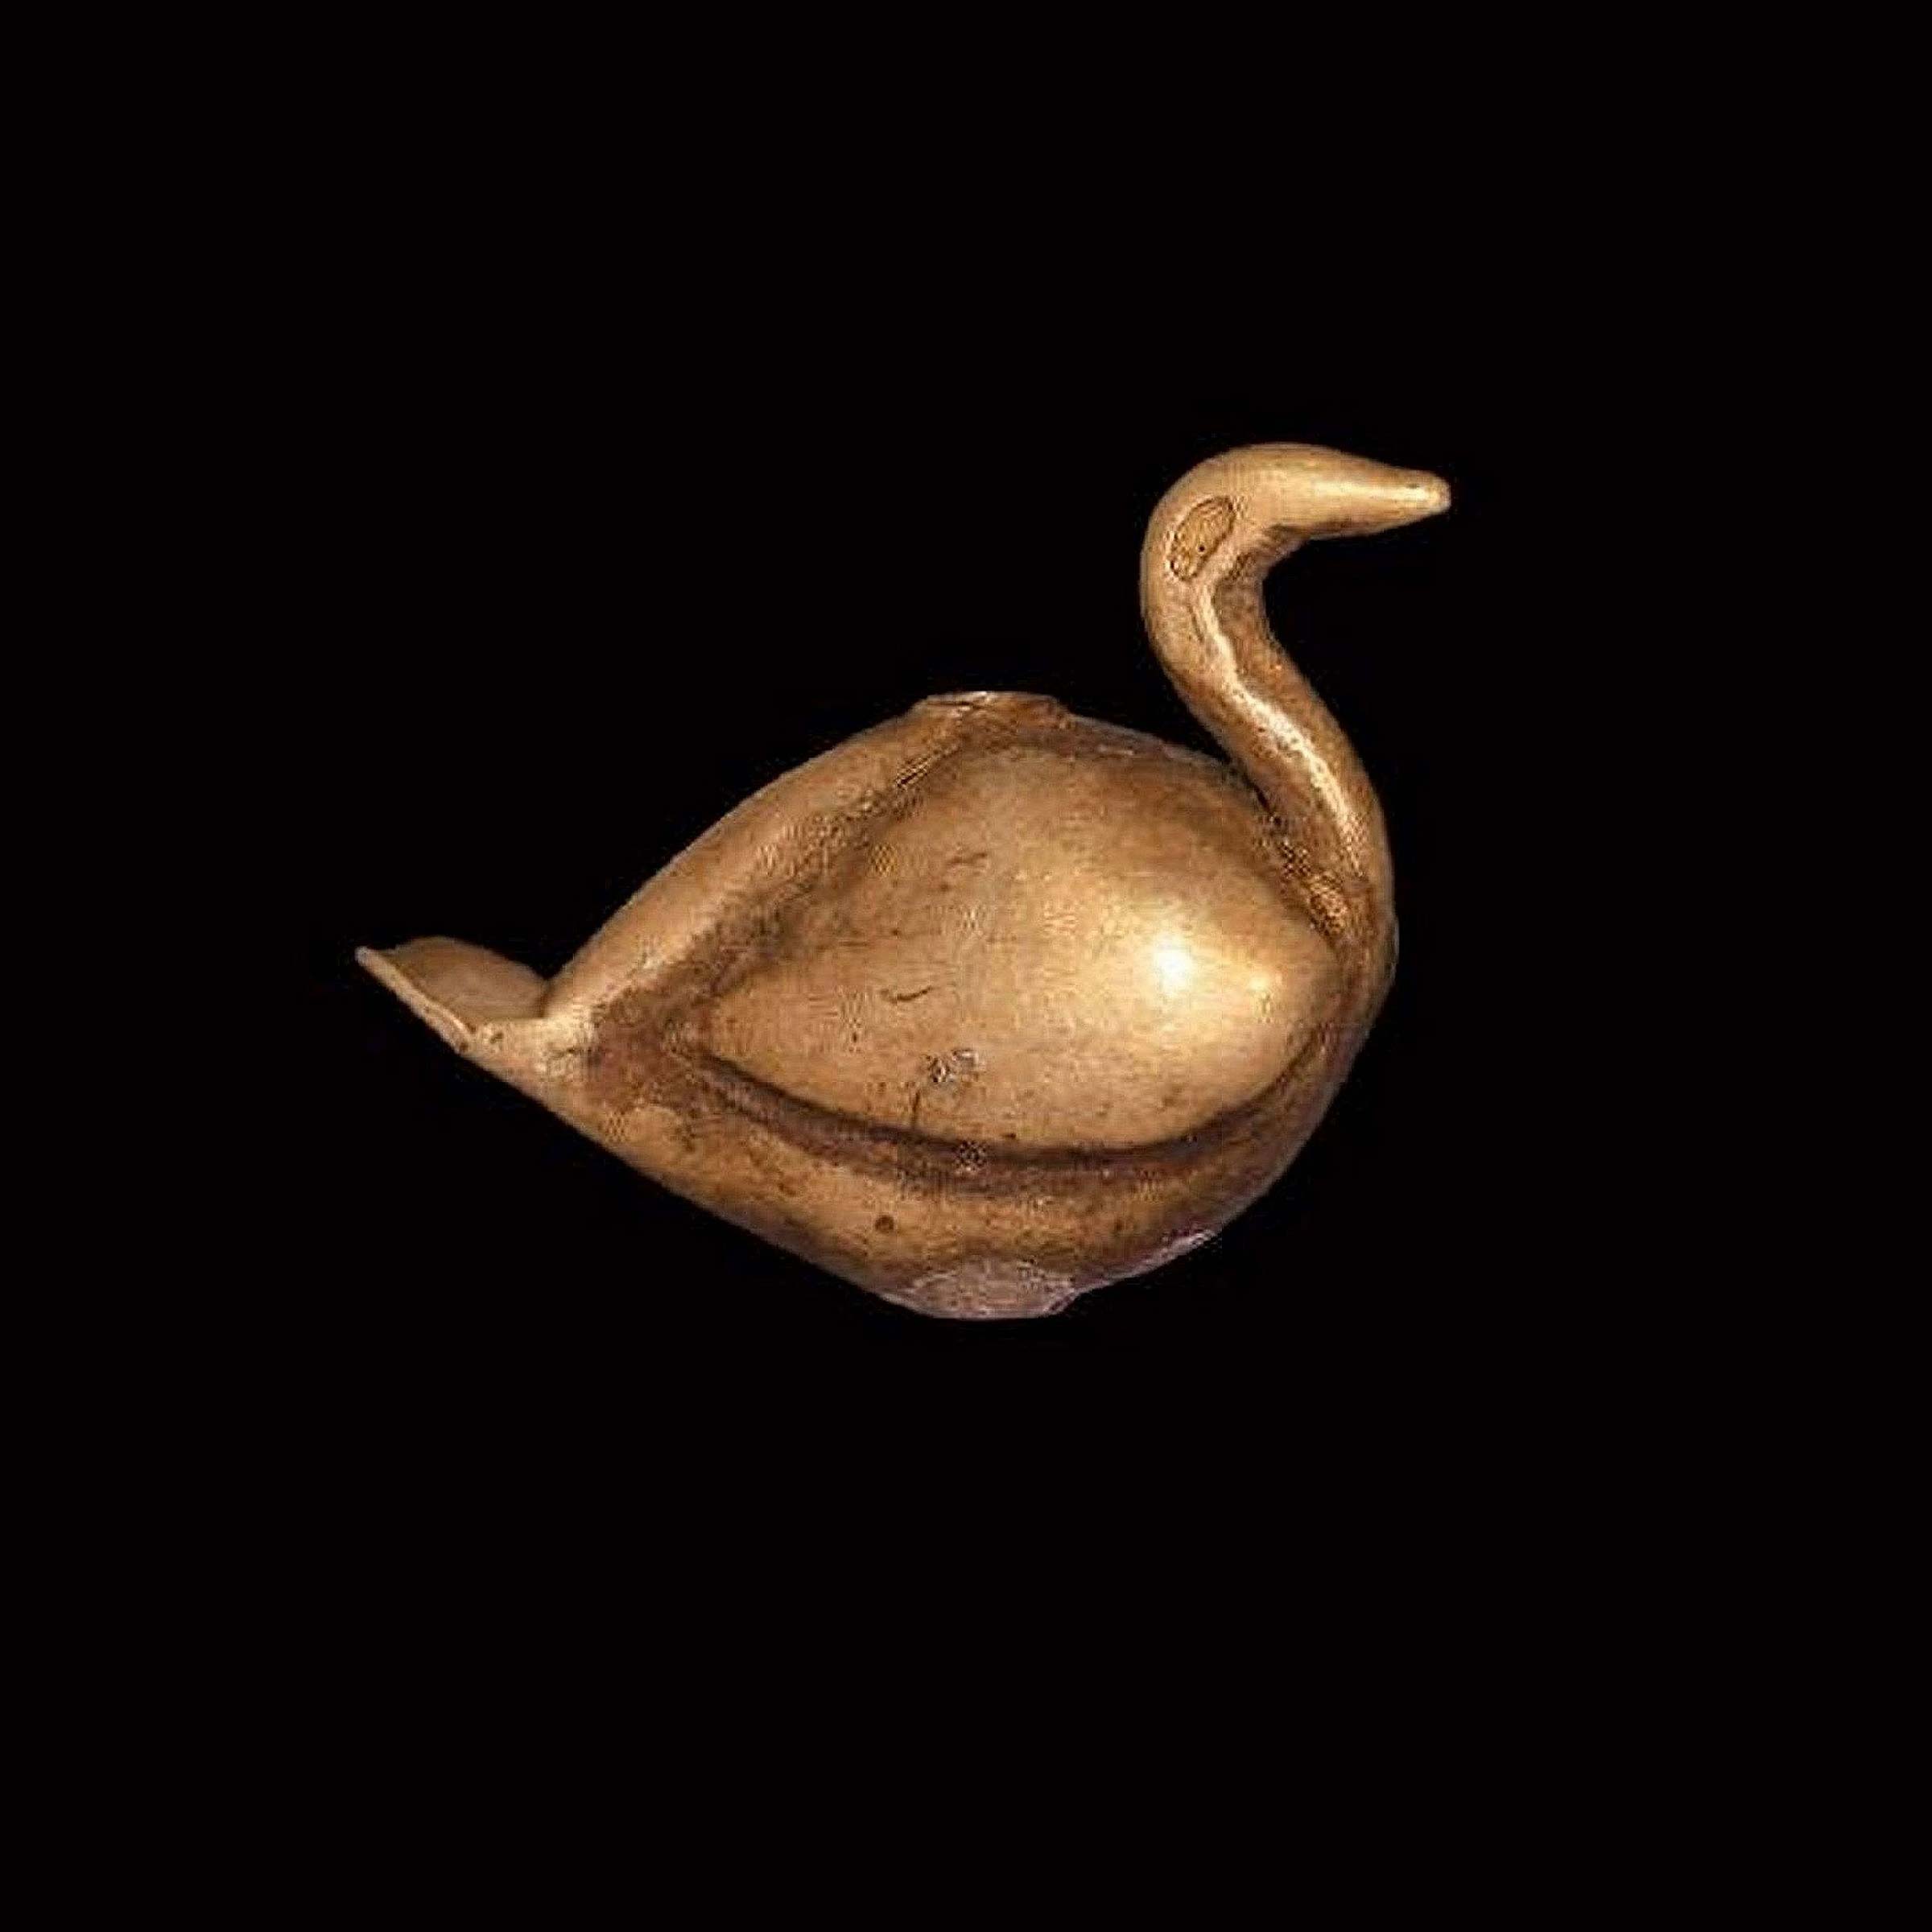 Greek hollow gold amulet shaped like reclining bird, pierced through the middle. 4th-3rd century BC, 1.62 grams, 16mm. Realized £160 + buyer’s premium in 2019. Image courtesy TimeLine Auctions Ltd. and LiveAuctioneers.